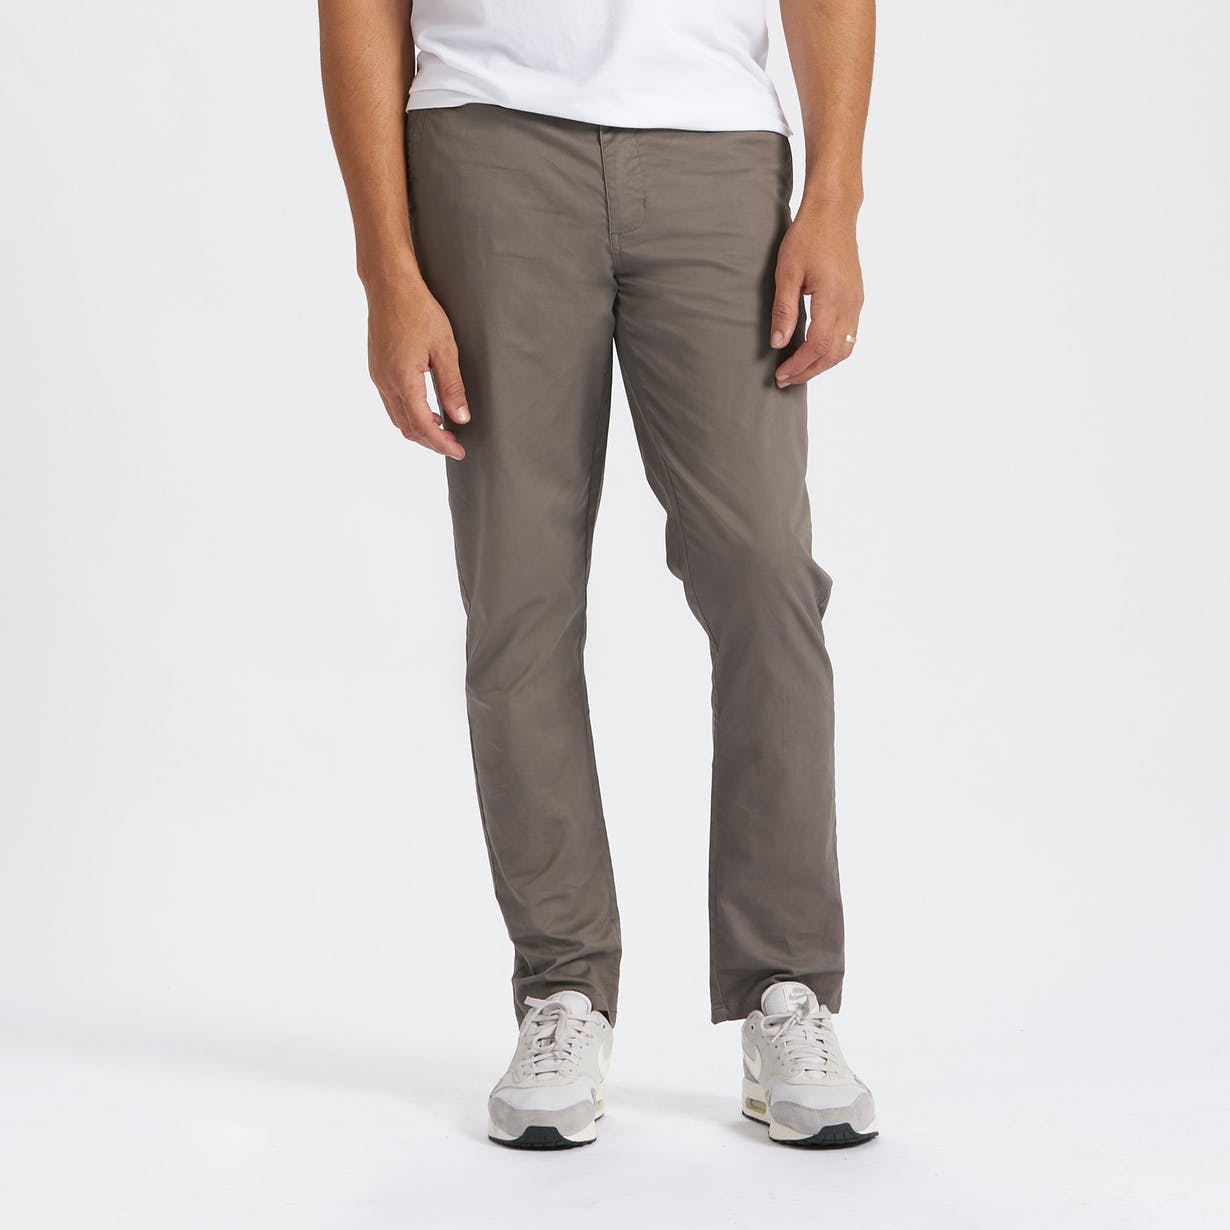 VUORI COLLINS CHINO PANT - AVAILABLE IN 3 COLORS